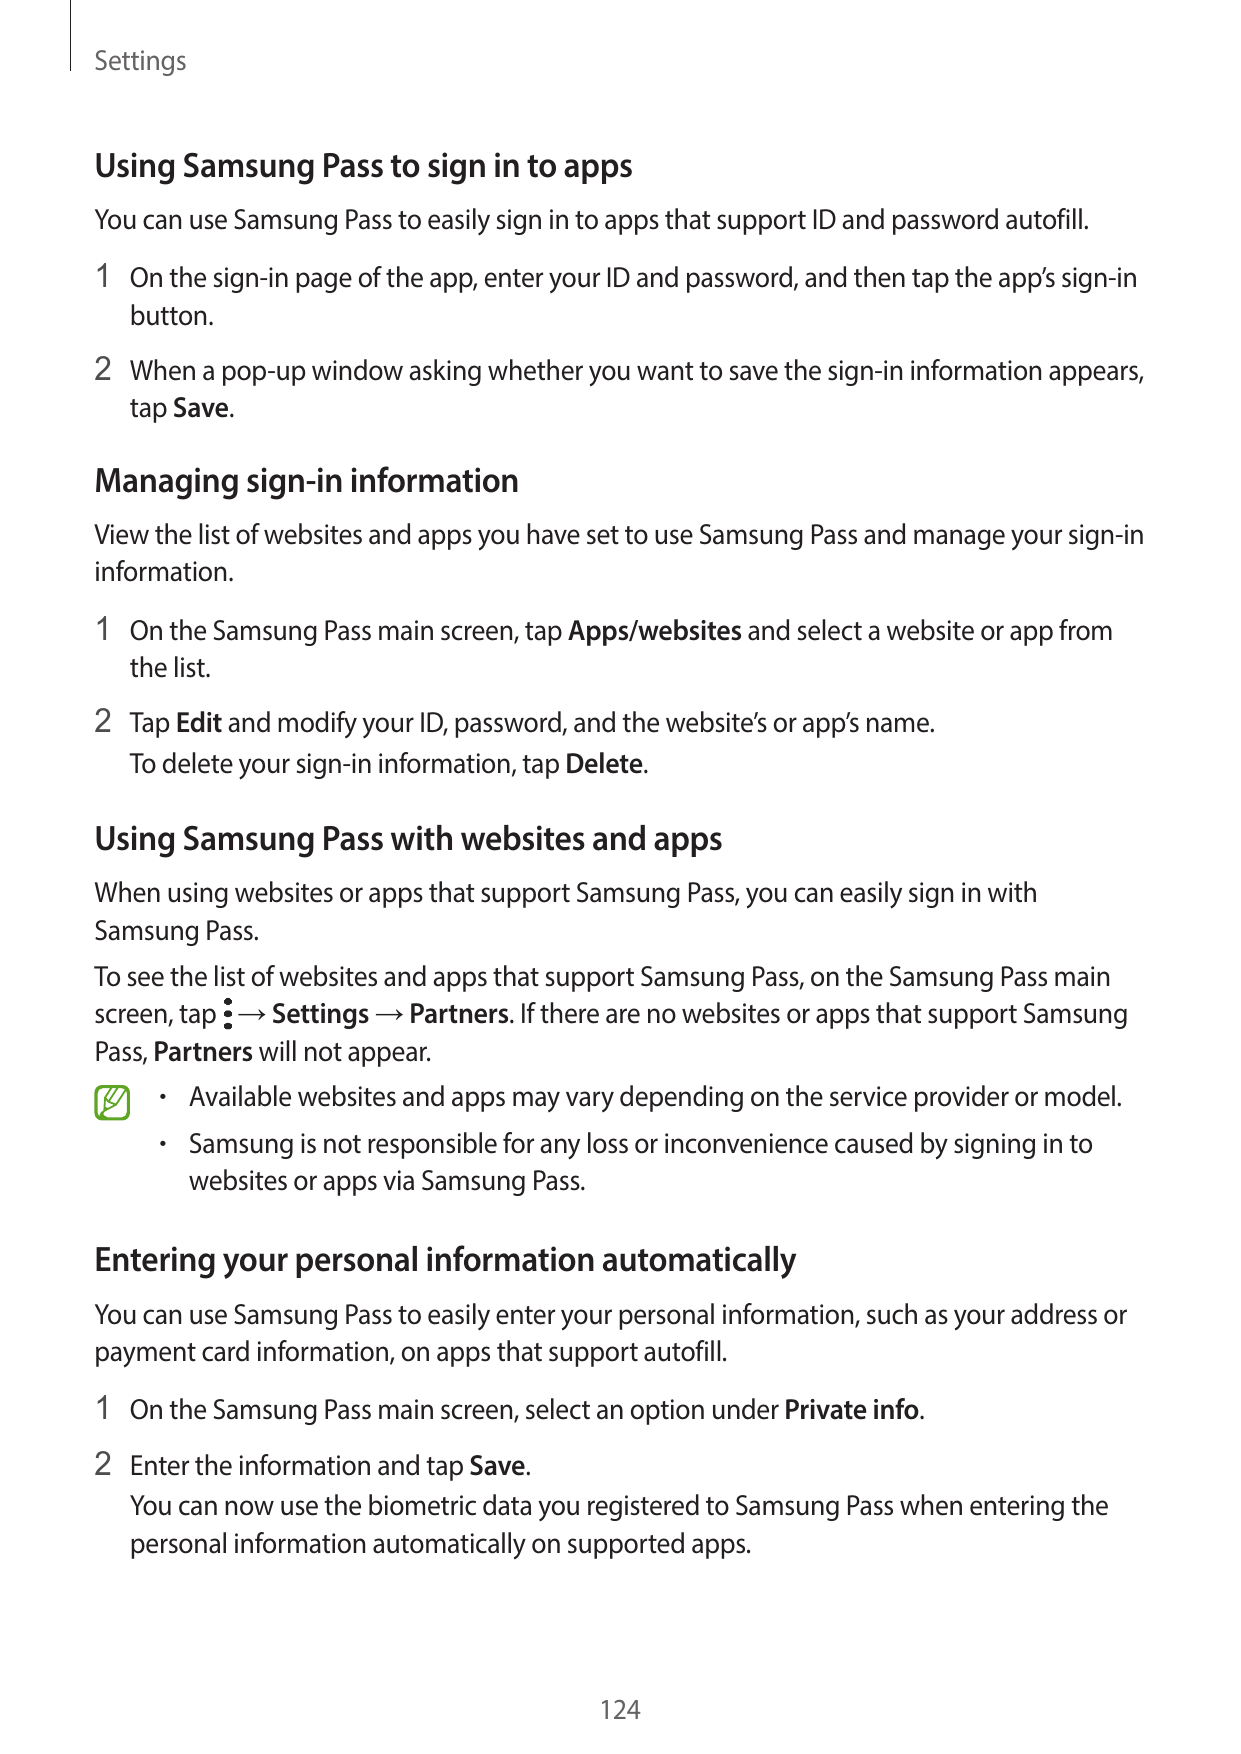 SettingsUsing Samsung Pass to sign in to appsYou can use Samsung Pass to easily sign in to apps that support ID and password aut